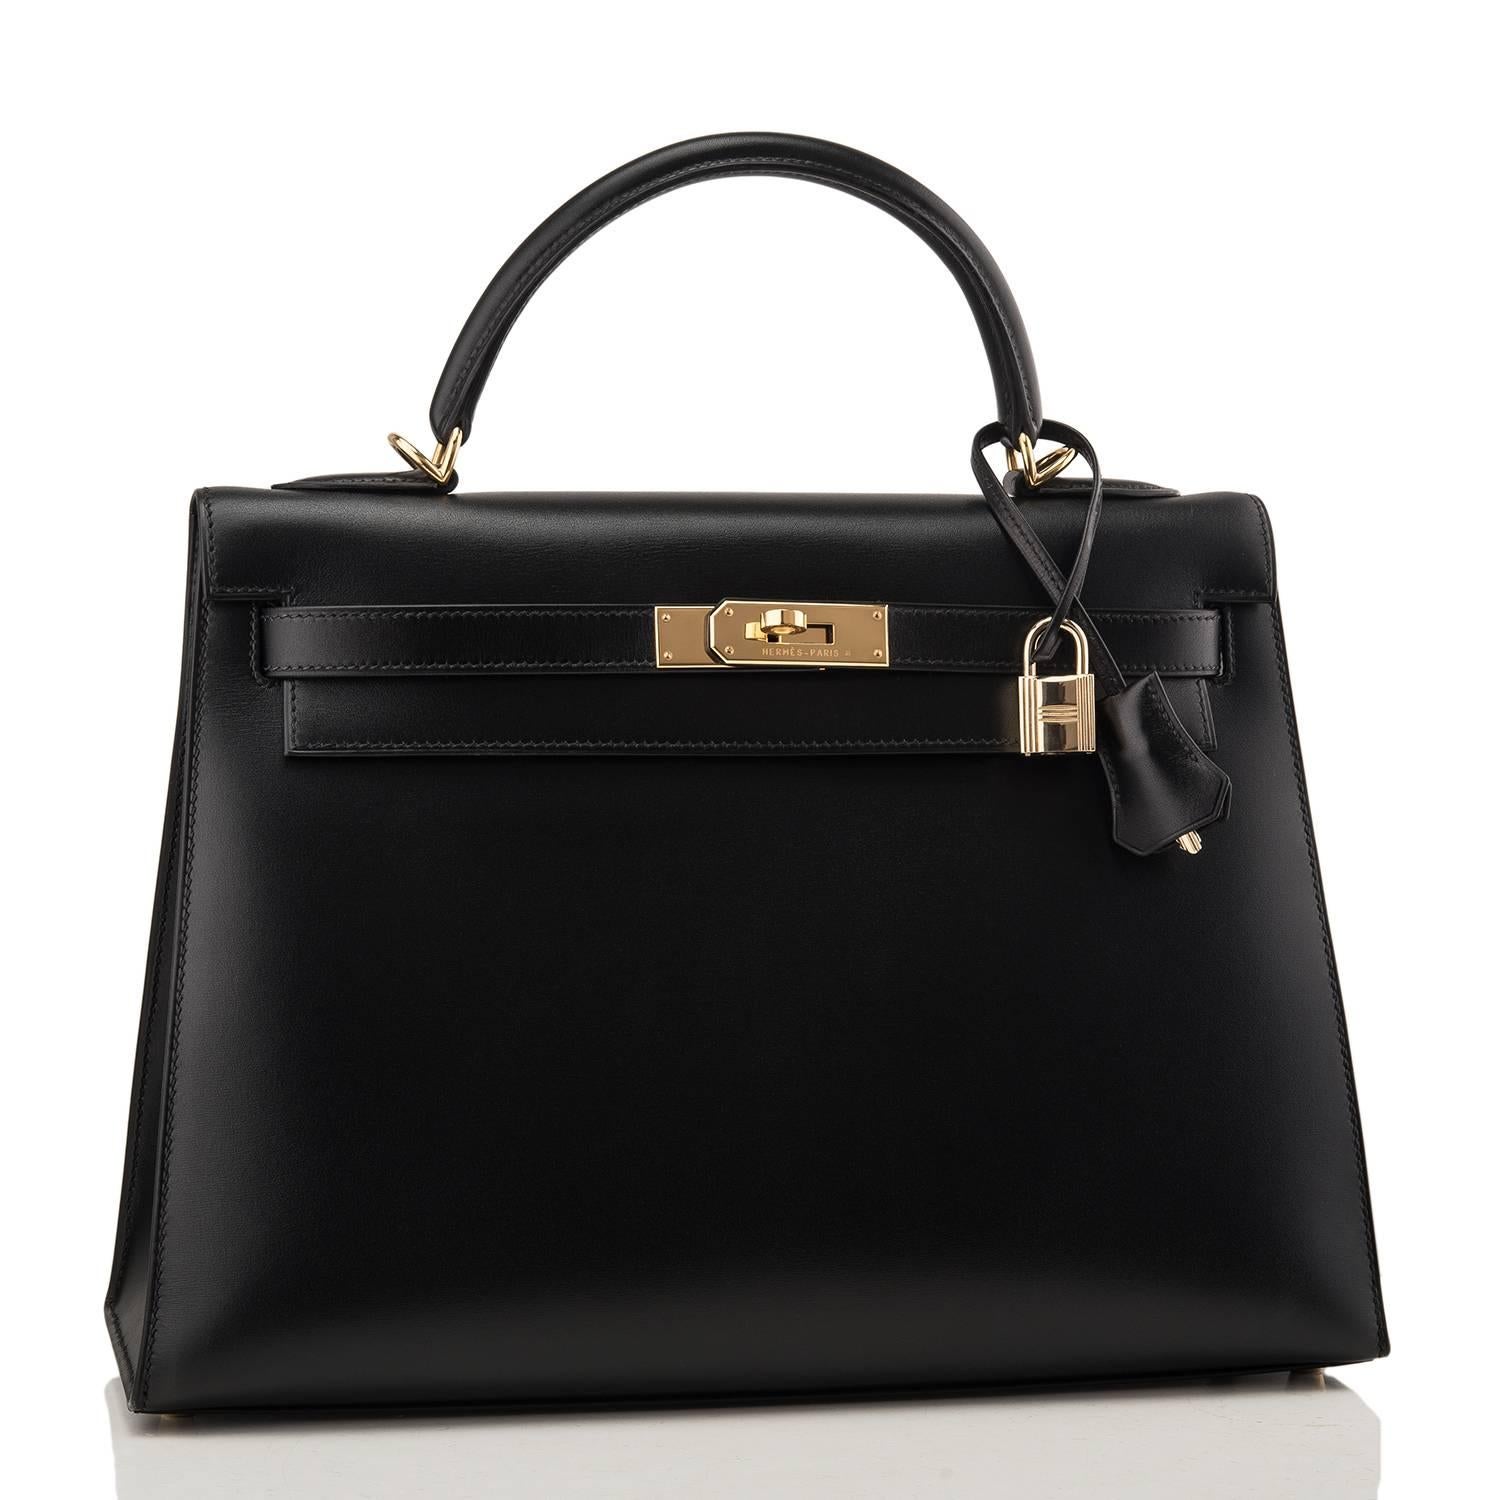 Hermes Black Sellier Kelly Box bag size 32cm of calfskin leather with gold hardware.

This Kelly has tonal stitching, a front toggle closure, a clochette with lock and two keys and a single rolled handle.

The interior is lined with Black chevre and